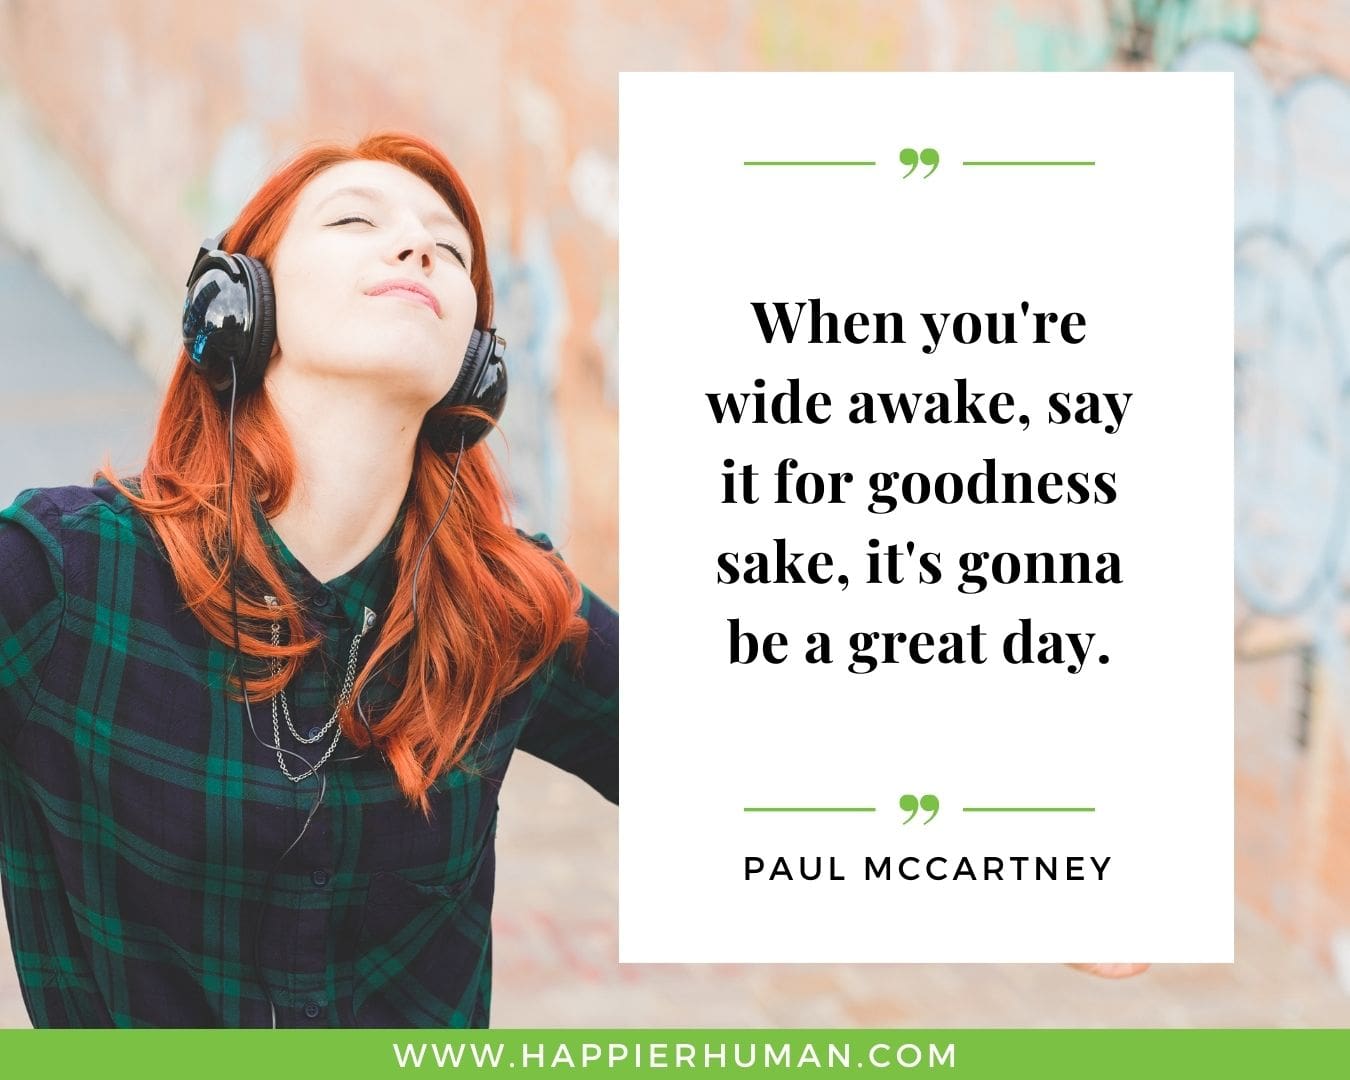 Great Day Quotes - “When you're wide awake, say it for goodness sake, it's gonna be a great day.” – Paul McCartney